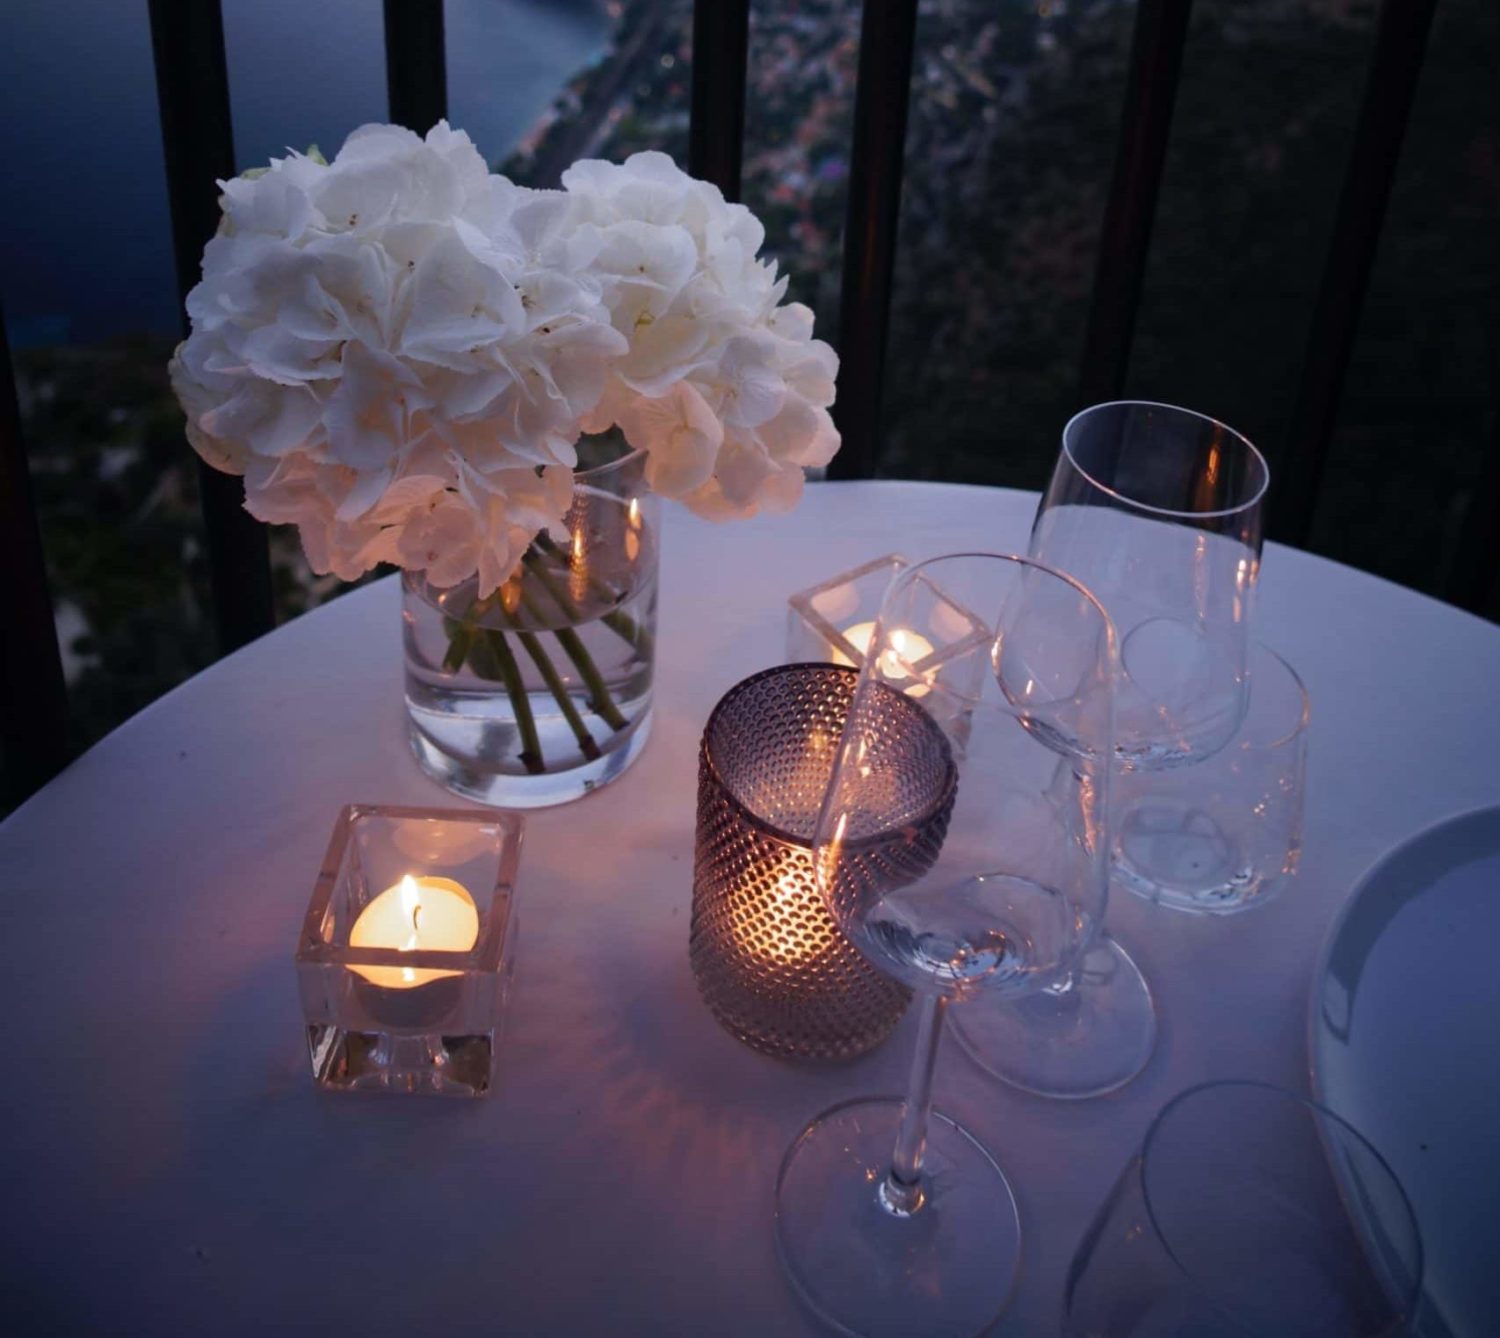 Dining table set with white flowers, glasses, and candles